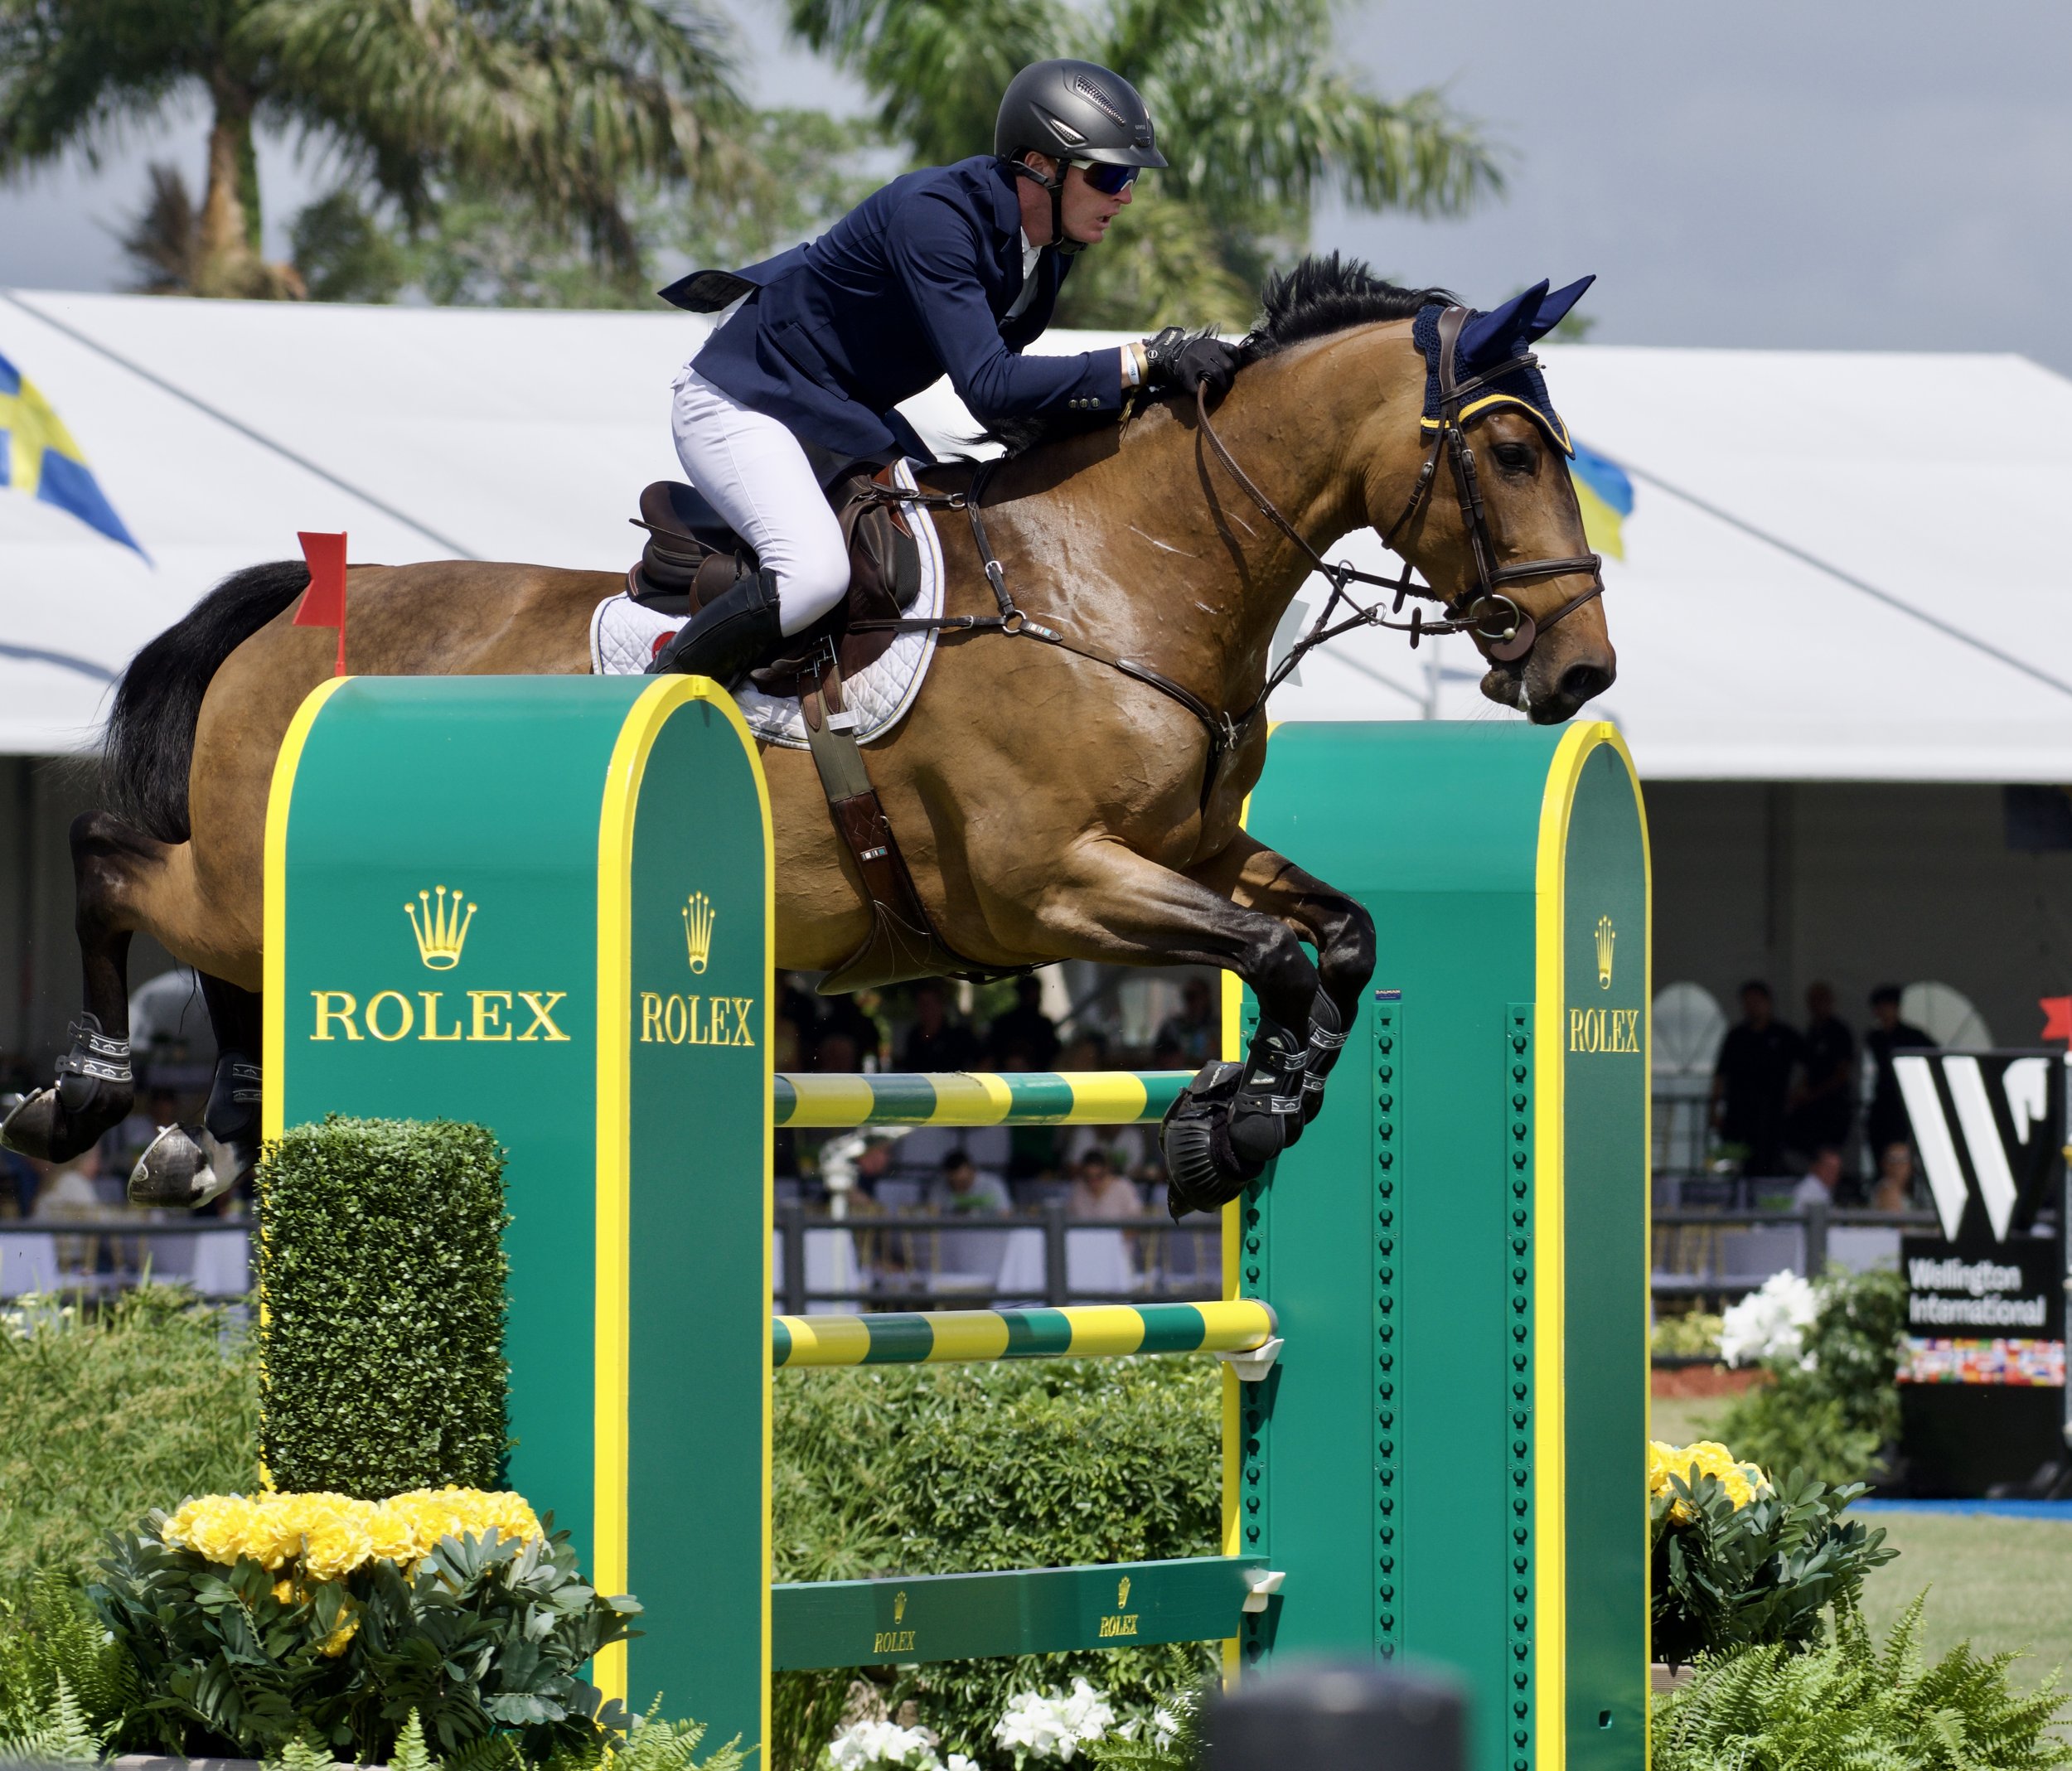 Daniel Coyle riding Legacy to 4th place